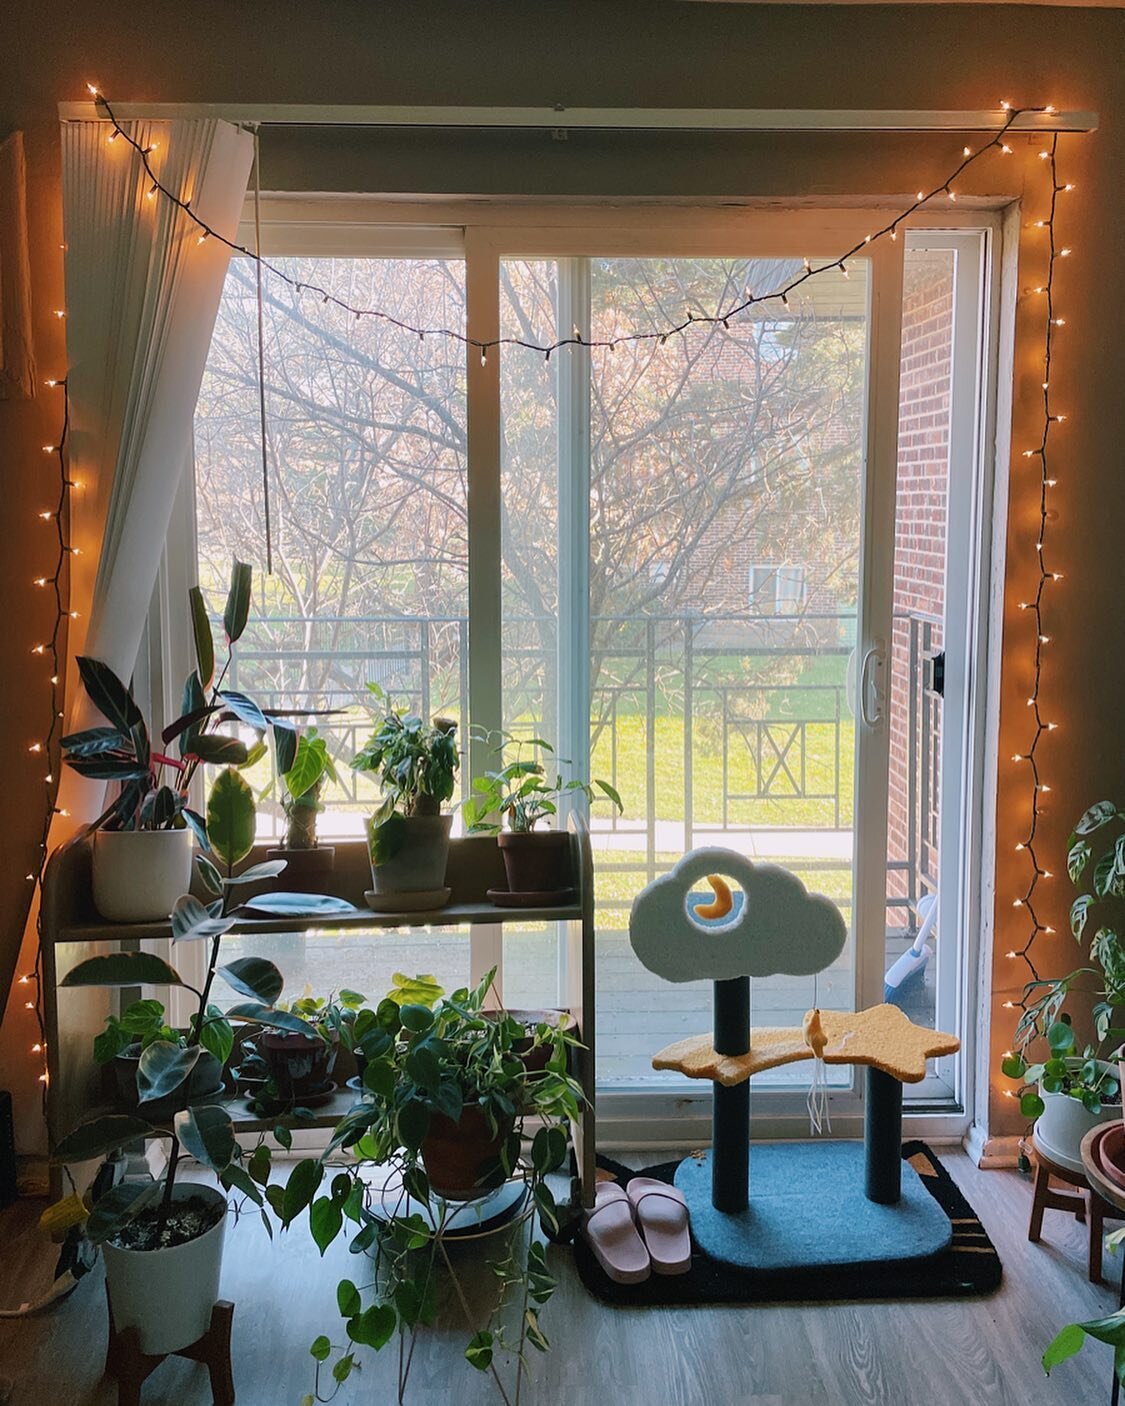 Very happy with my cozy homey space at the moment ☺️